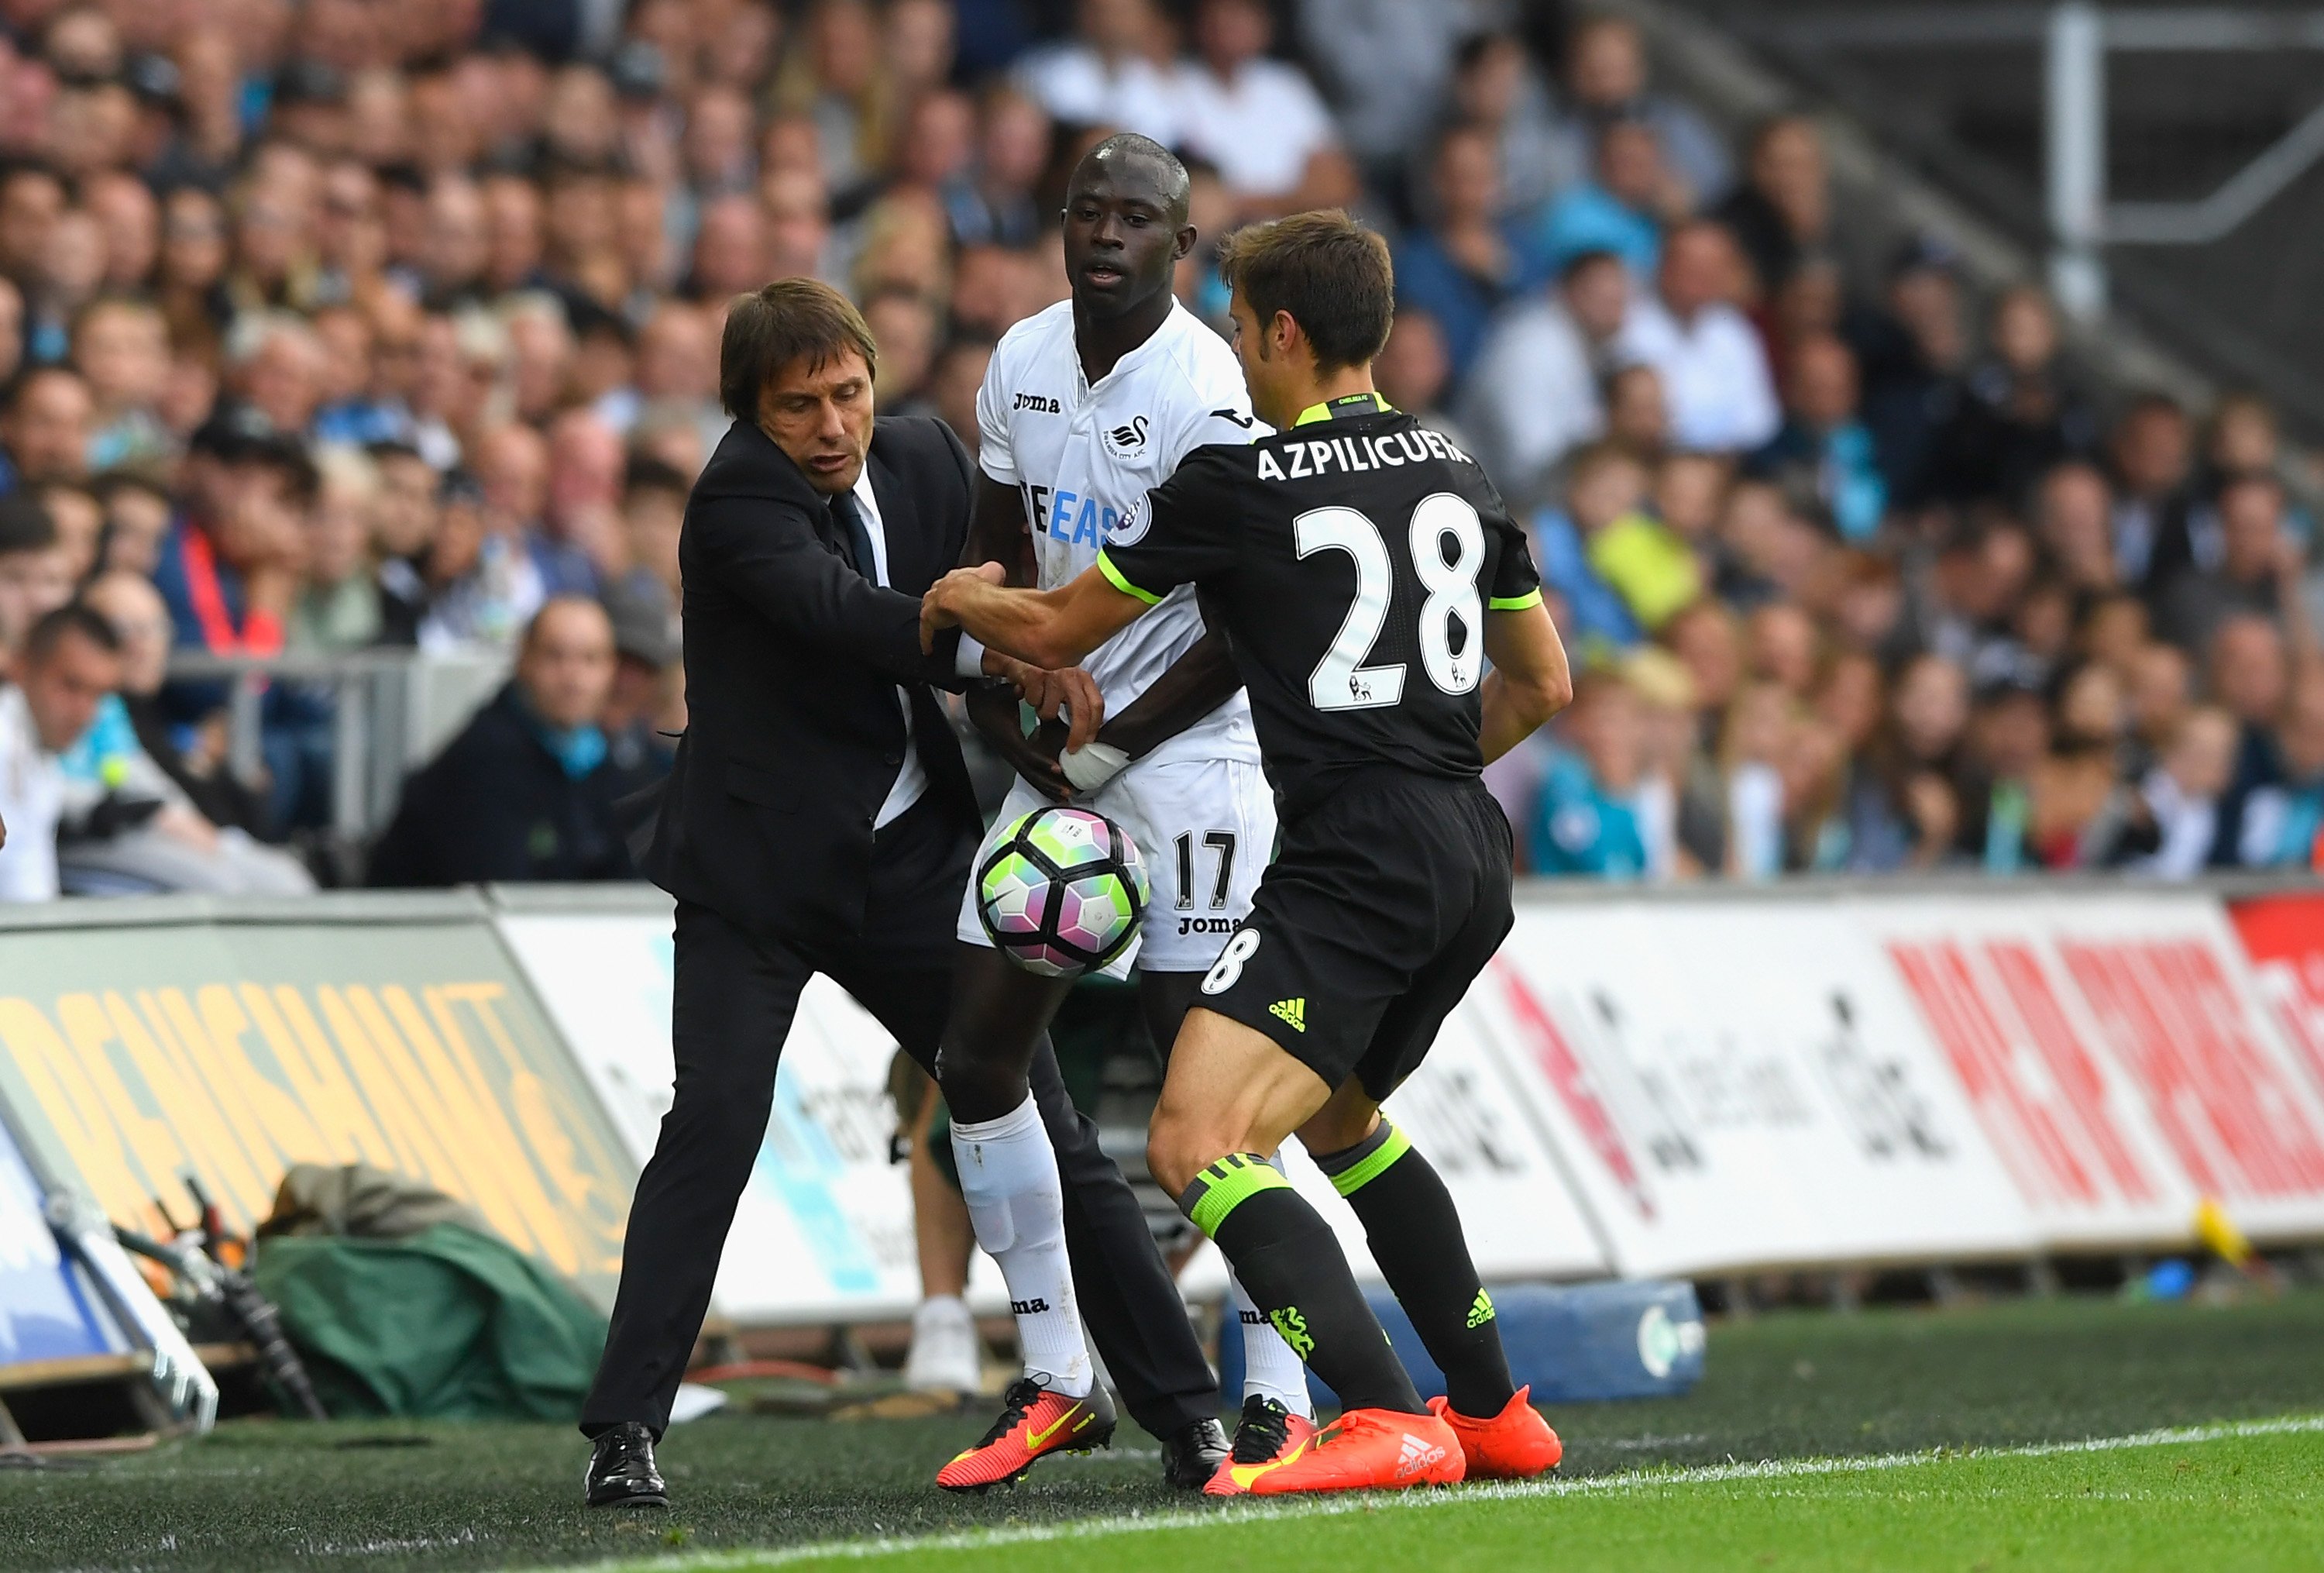 SWANSEA, WALES - SEPTEMBER 11:  Chelsea manager Antonio Conte battles to get the ball back with Cesar Apilicueta (r) from Swansea forward Modou Barrow during the Premier League match between Swansea City and Chelsea at Liberty Stadium on September 11, 2016 in Swansea, Wales.  (Photo by Stu Forster/Getty Images)